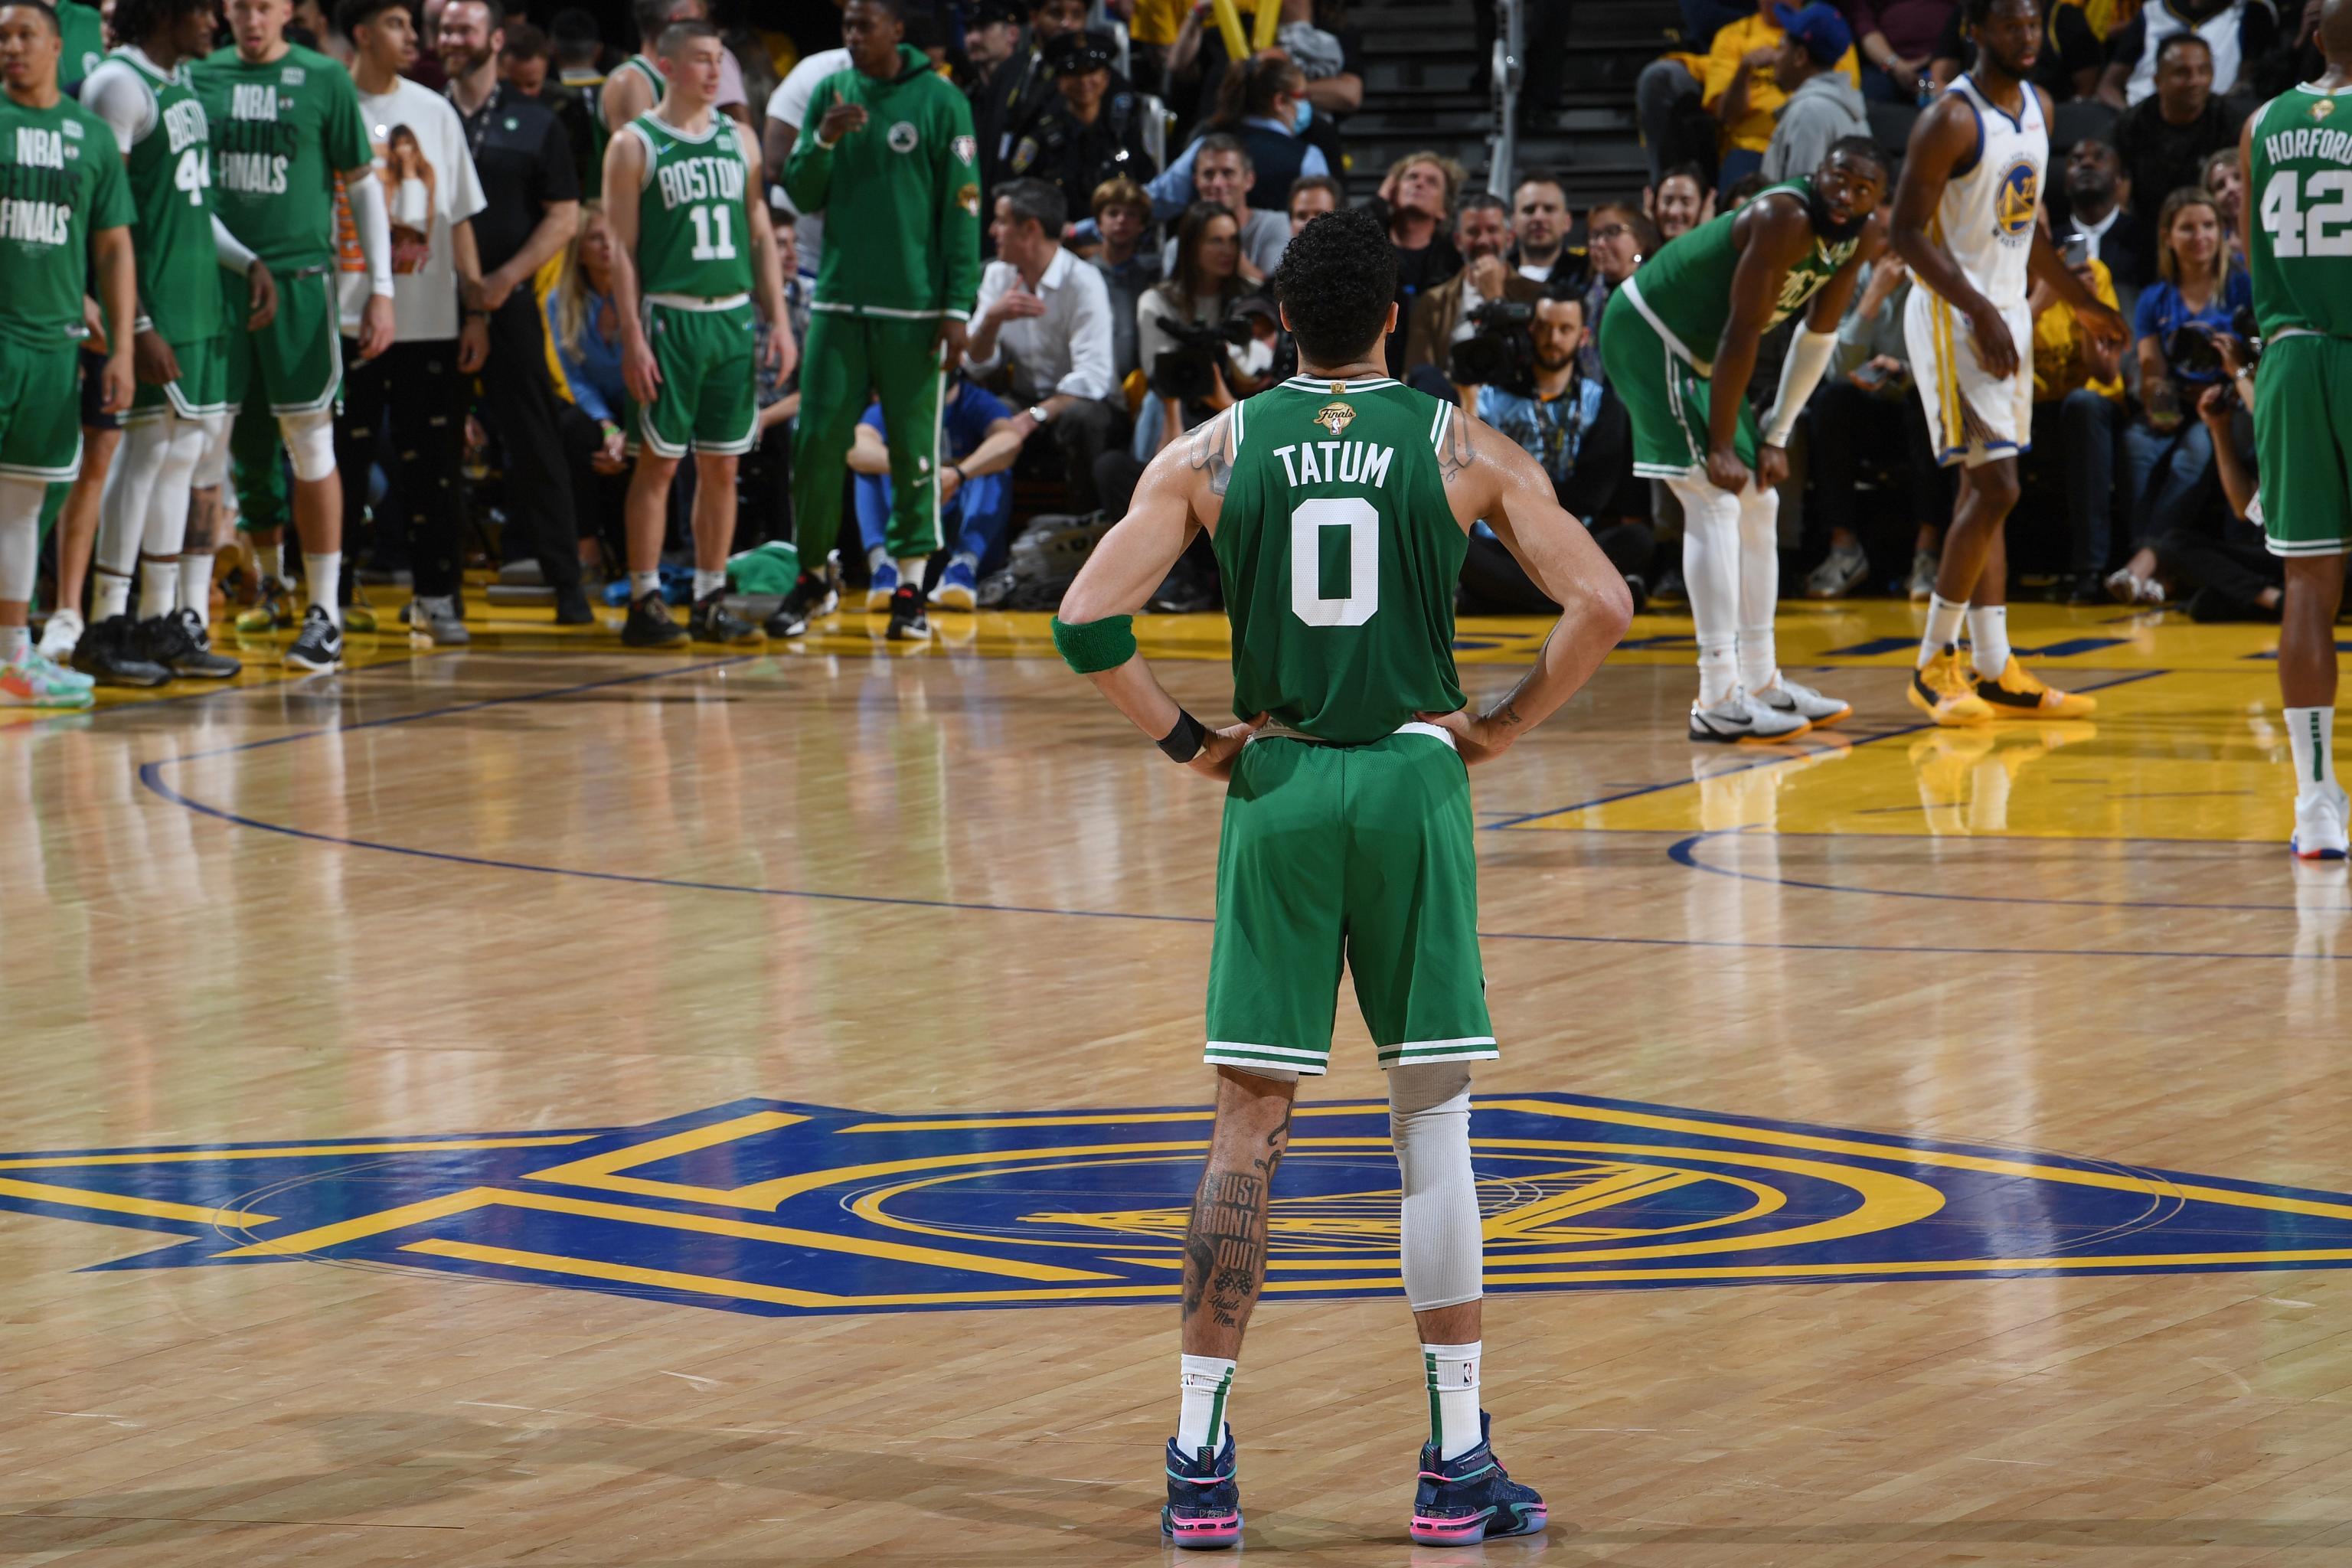 The 2022 NBA Finals come early with epic Heat-Celtics series – Sports on  Draft